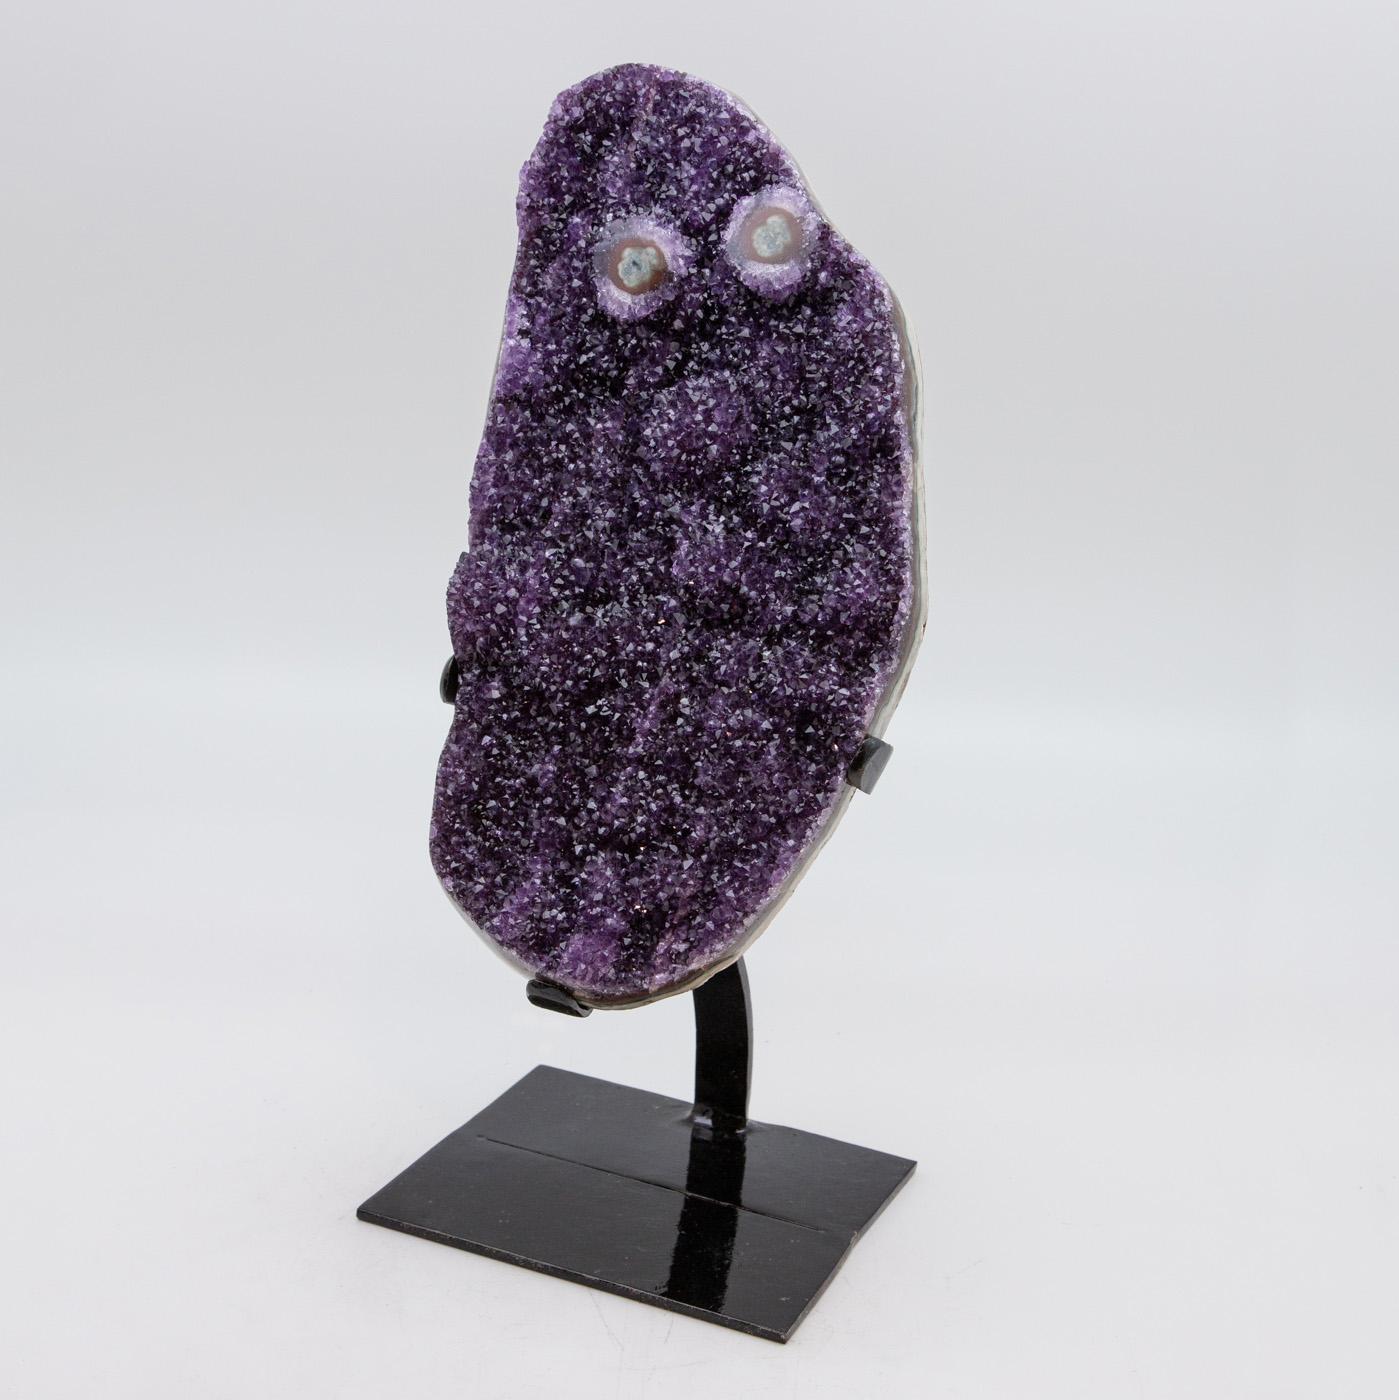 Extra large mounted purple amethyst Druzy Geode. Stands on custom made black metal base. From Uruguay. Measures: 17.5